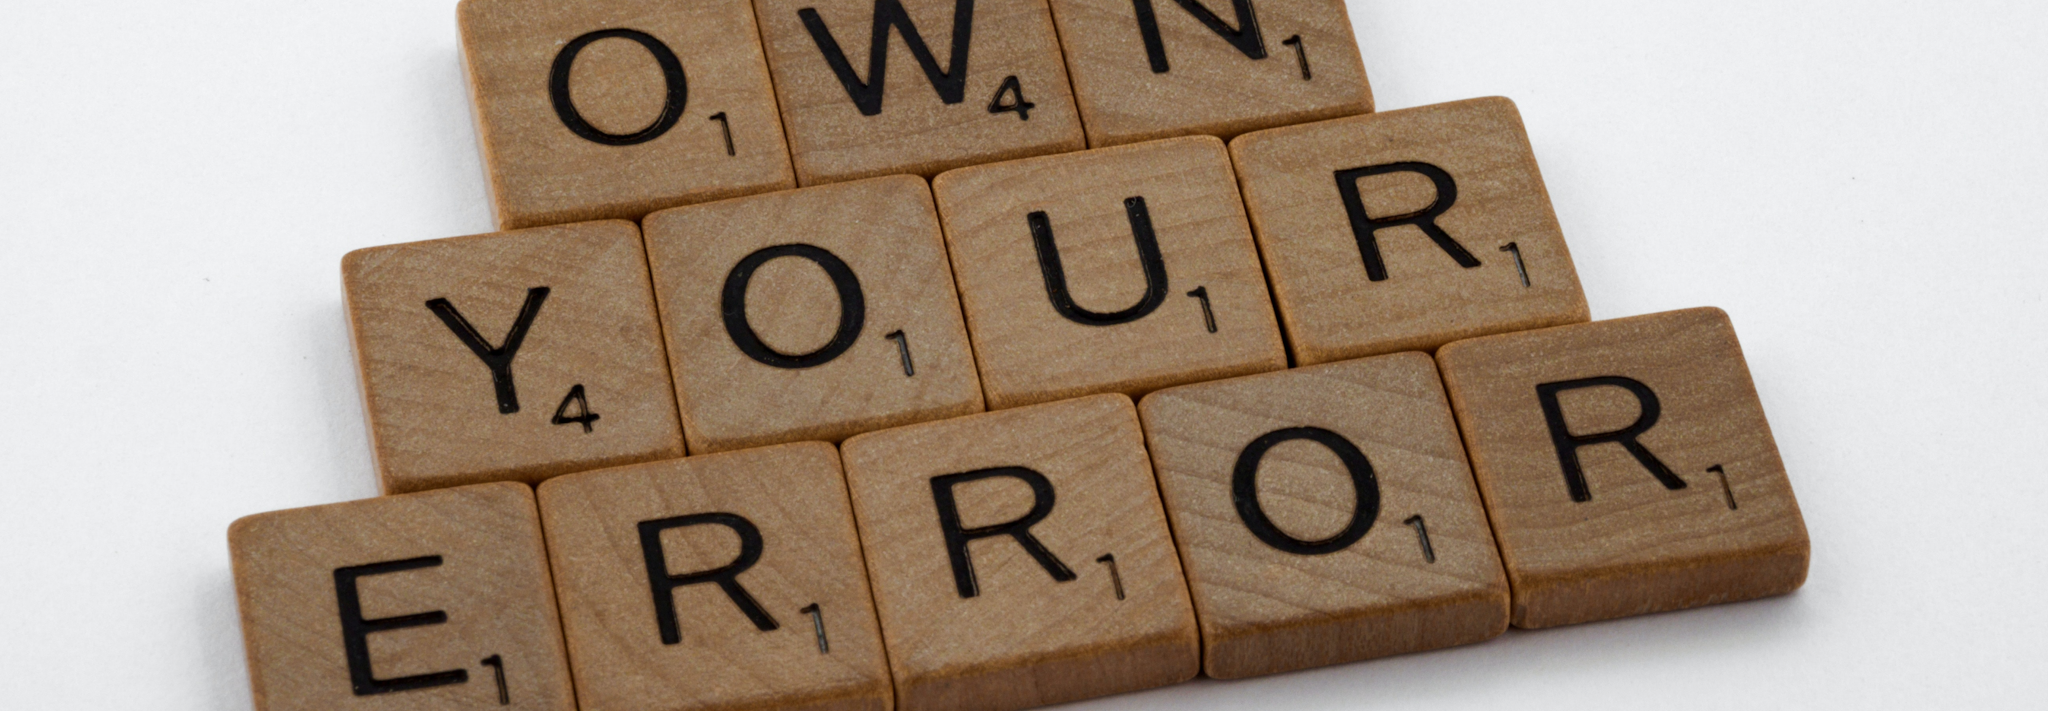 Scrabble of Own Your Errors